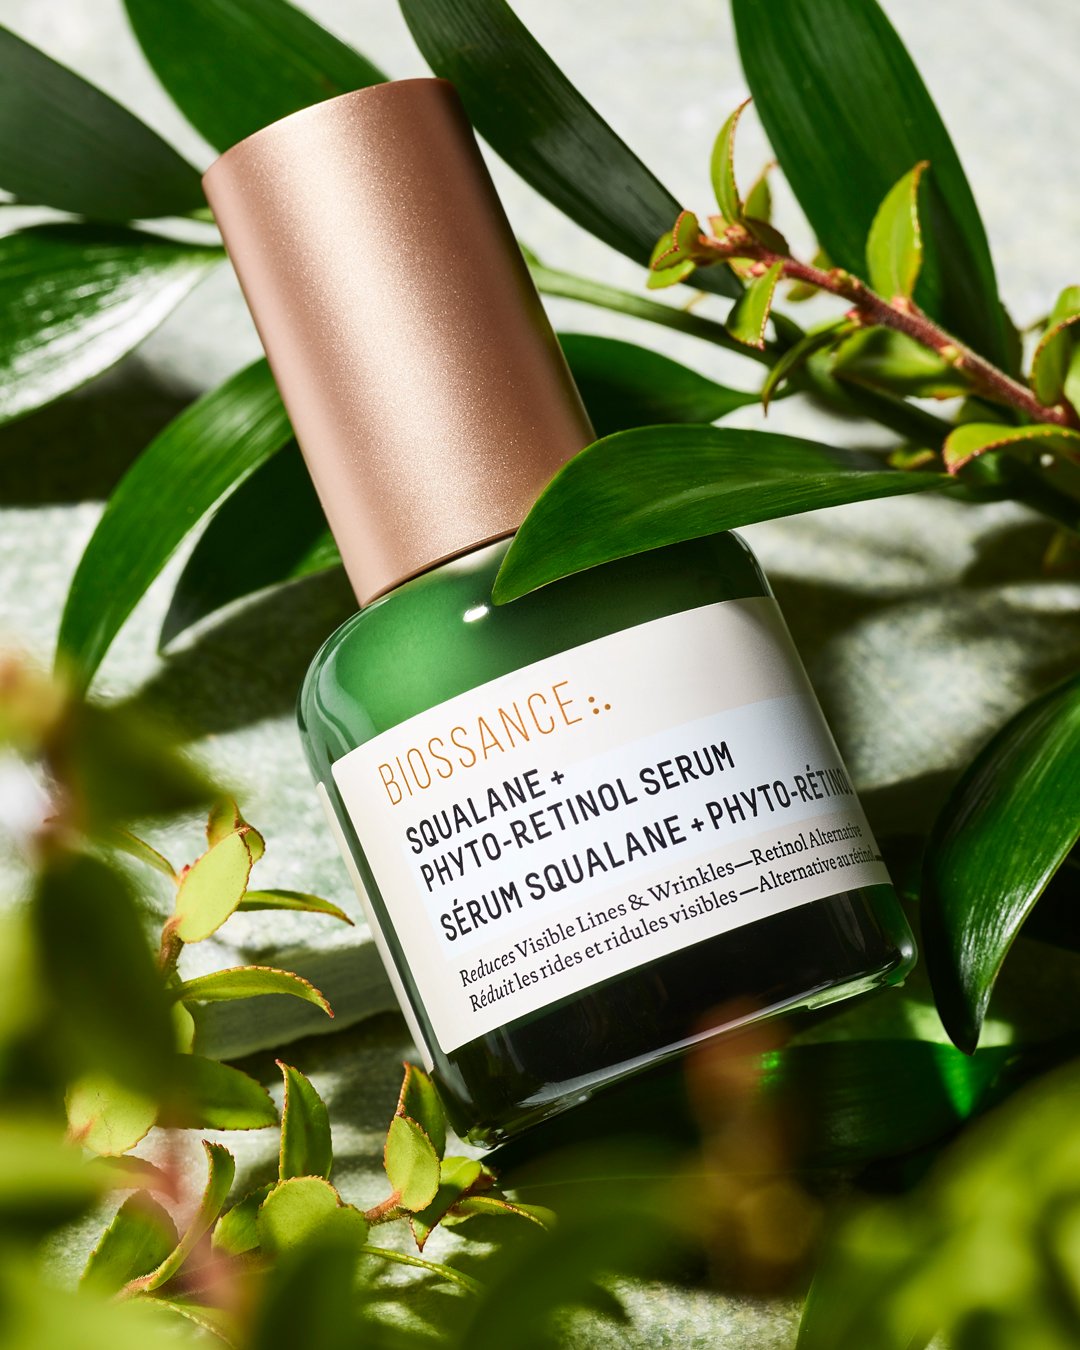 Sephora on Twitter: "Can you be-leaf it? 🌿 @Biossance's Squalane + Phyto-Retinol  Serum uses a plant-based alternative to retinol for similar youth-enhancing  effects in a super-gentle formula that all skin types can